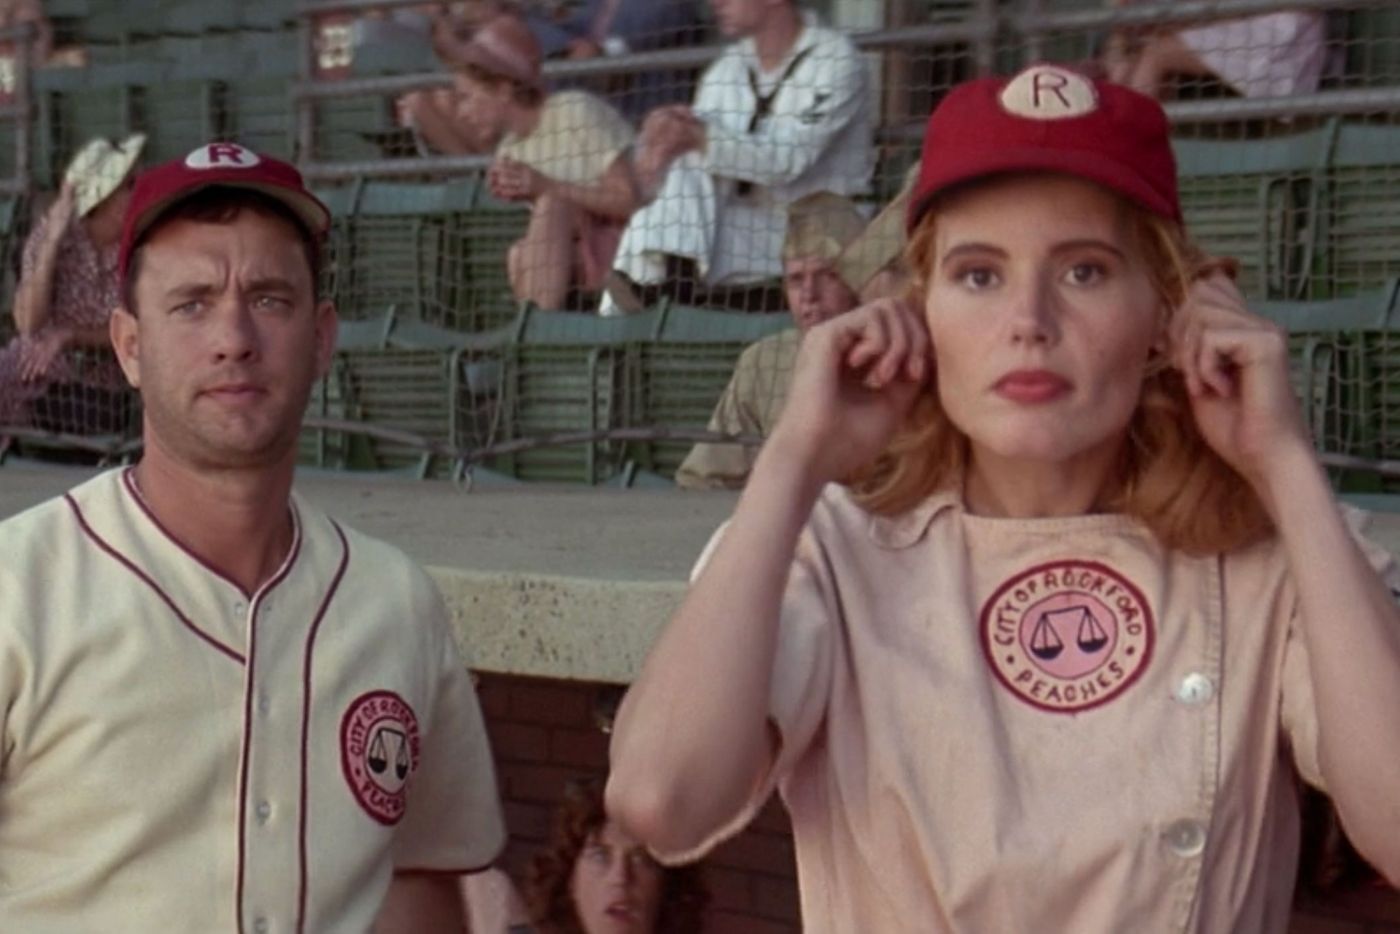 Happy birthday to Tom Hanks!! Who portrayed Rockford Peaches manager, Jimmy  Dugan in A League of Their Own!! There's no crying in baseball!!  (Photo: - All American Girls Professional Baseball League Players